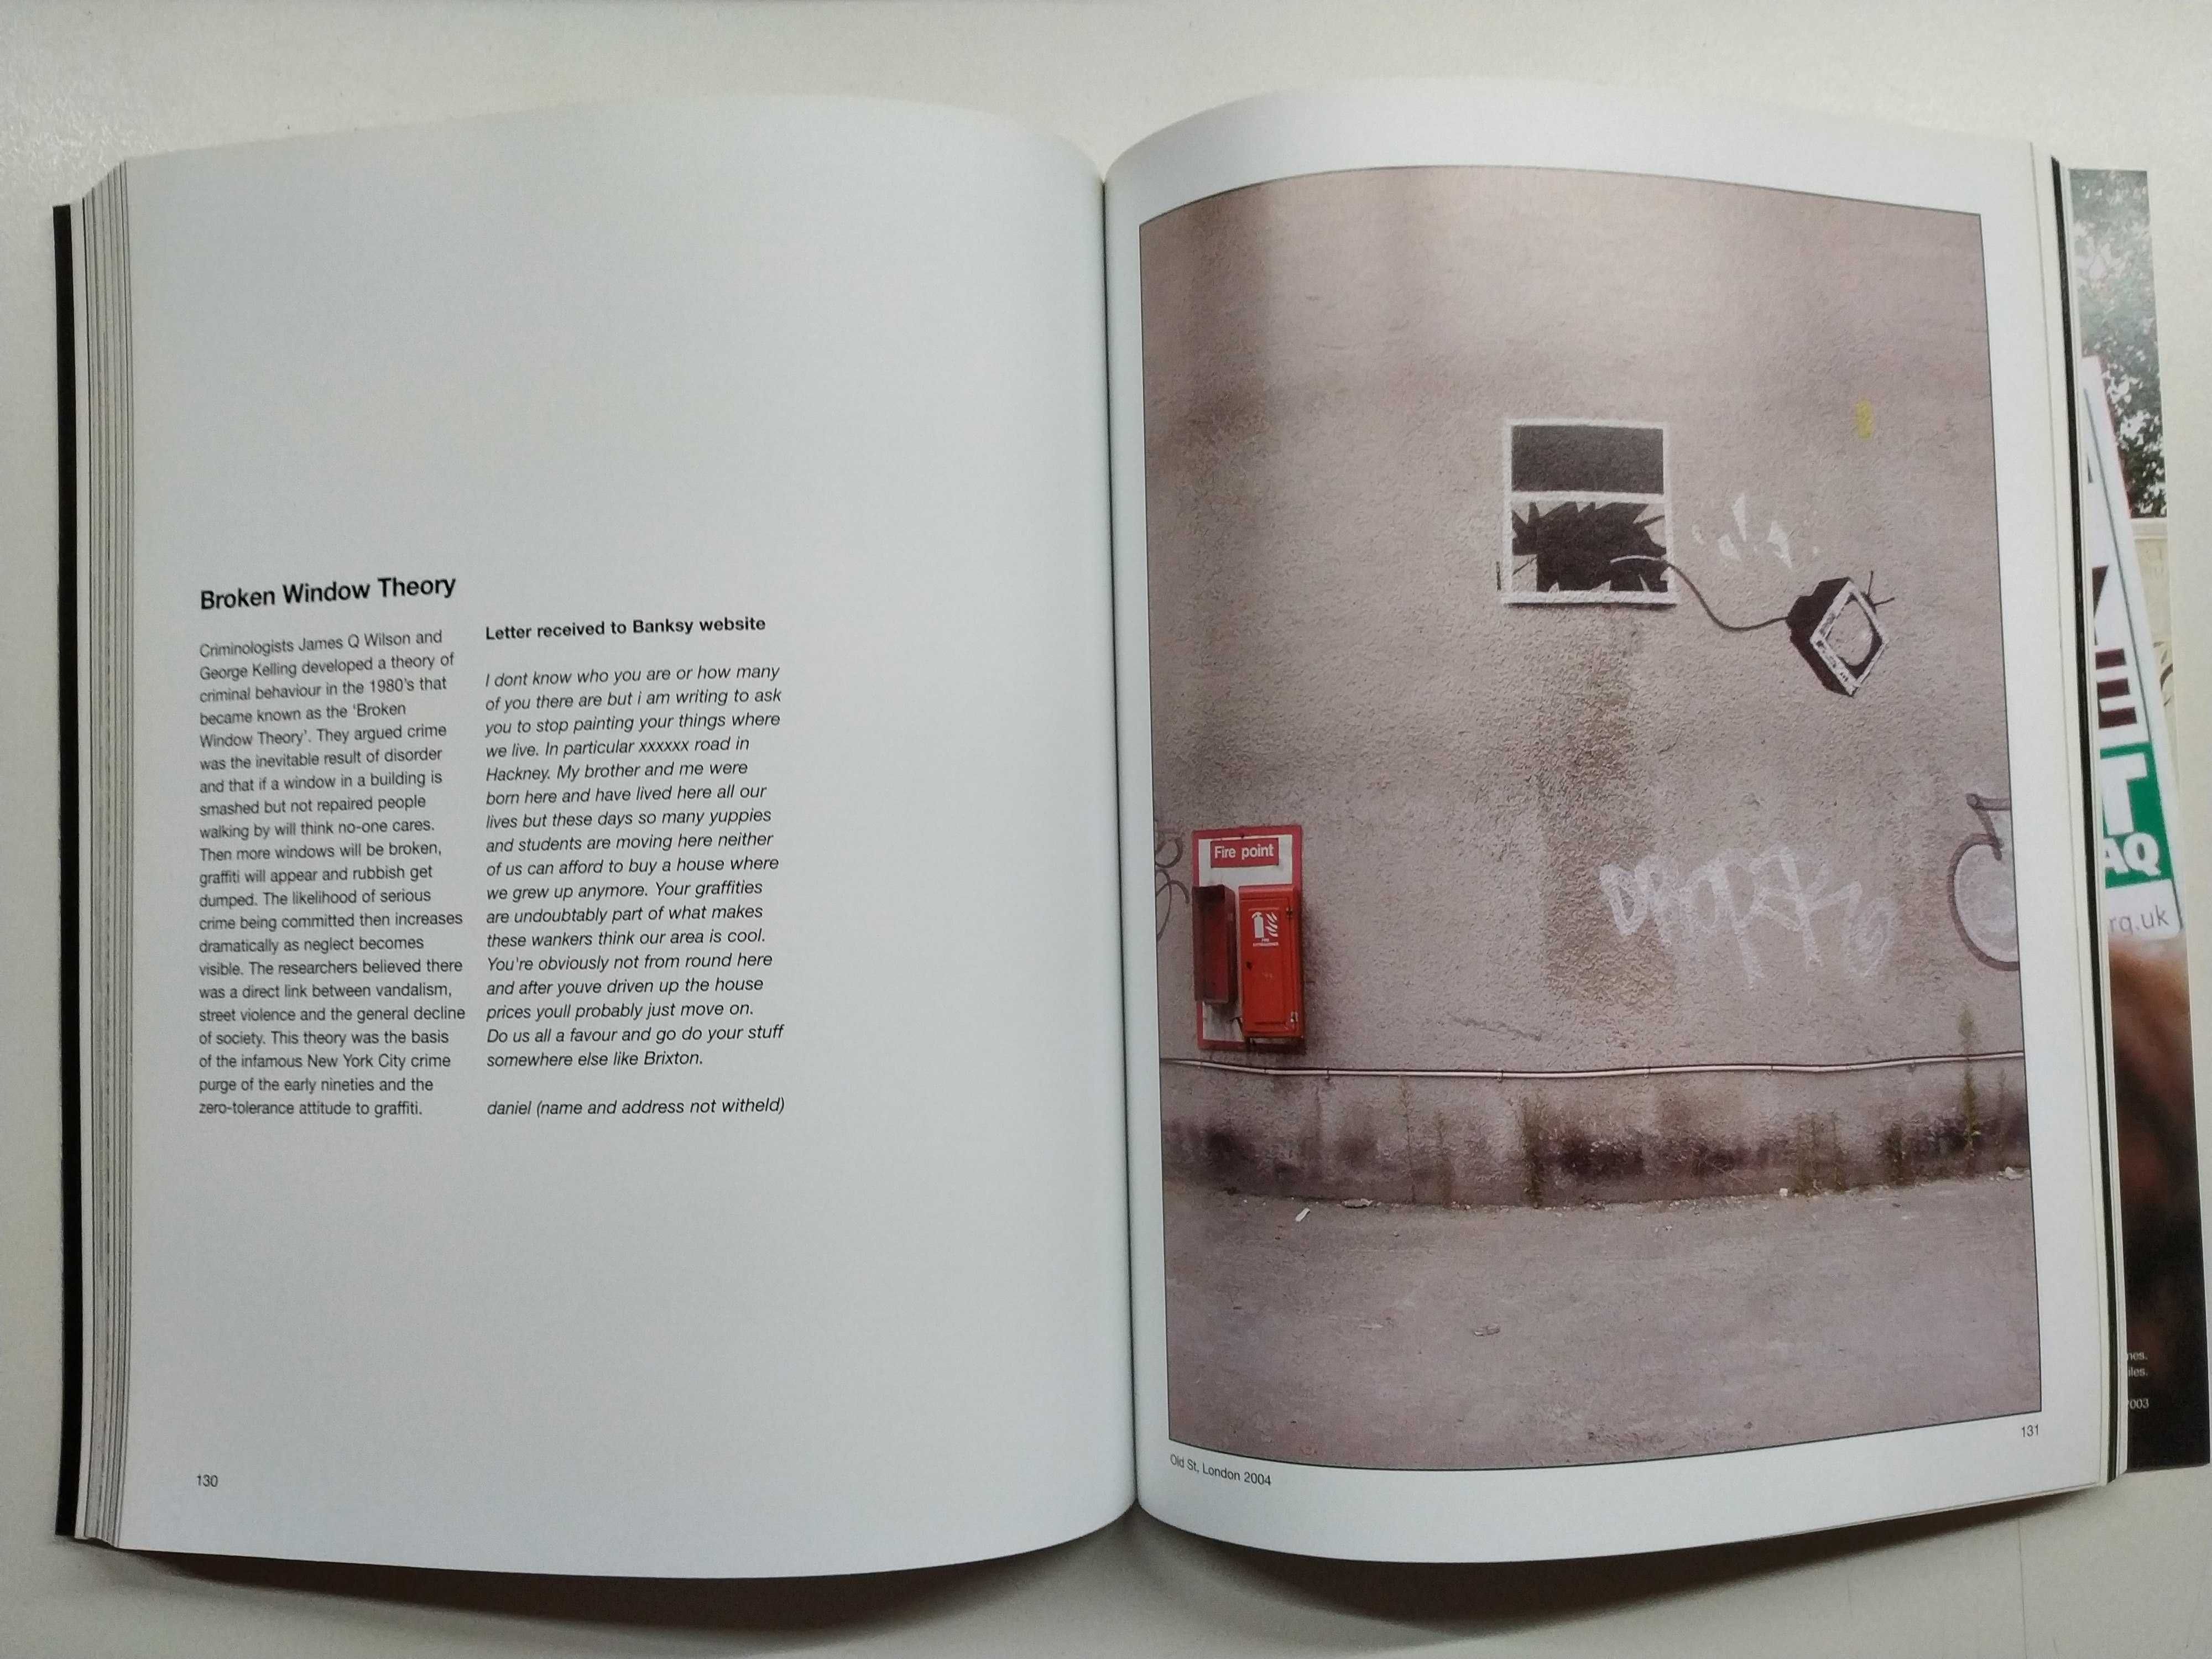 Livro - BANKSY Wall and Piece